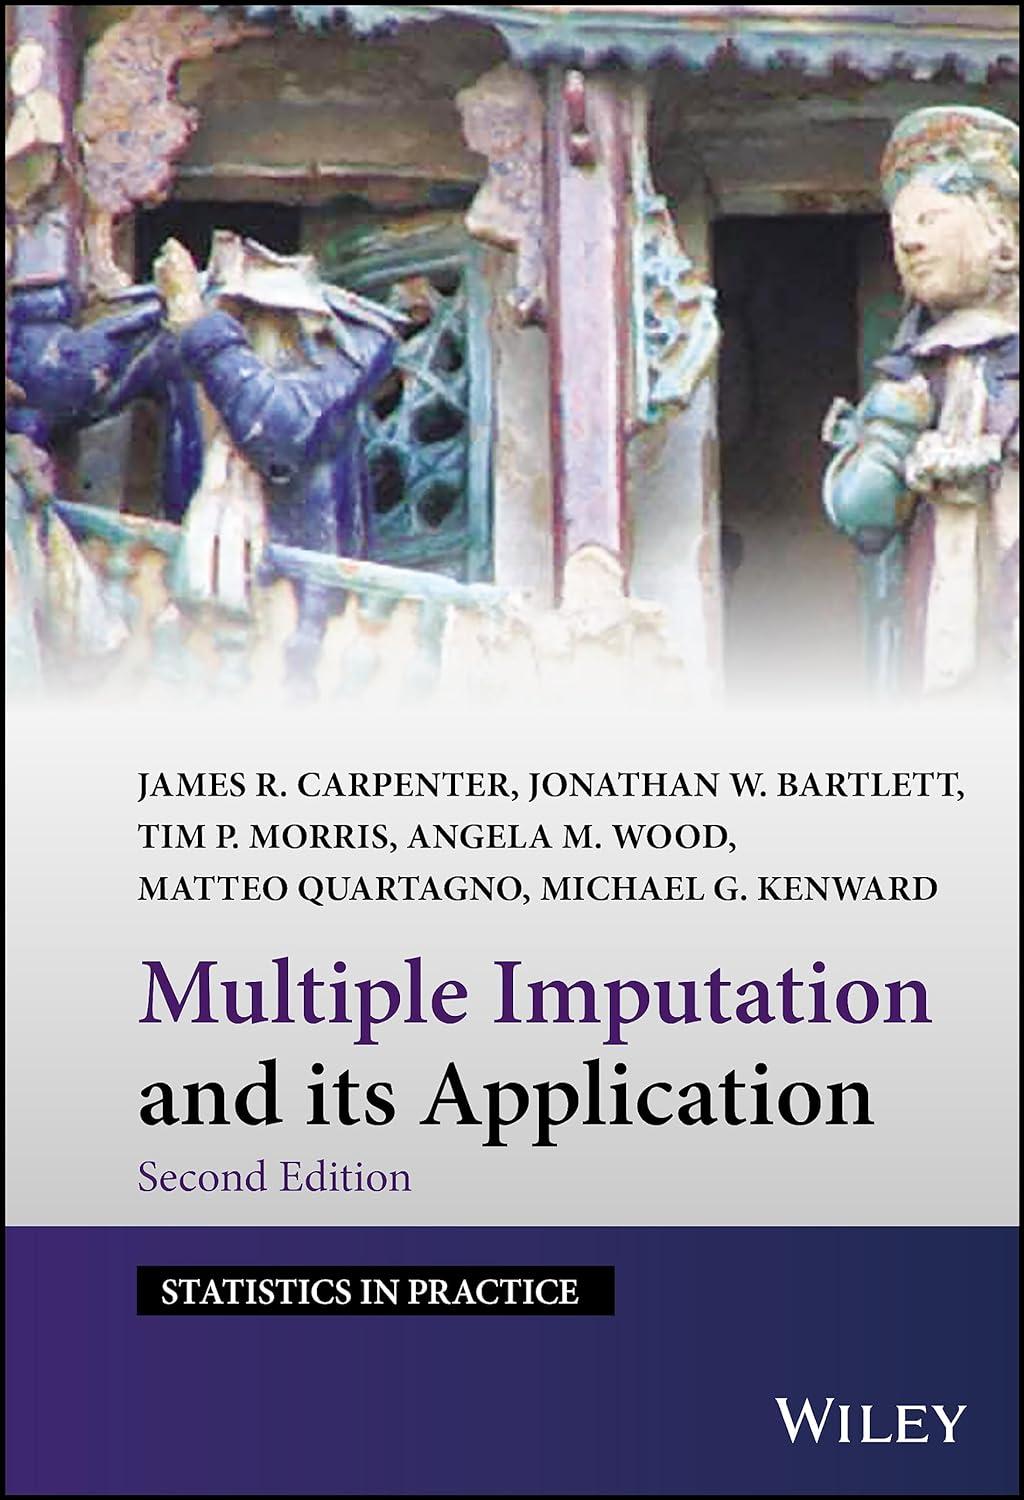 multiple imputation and its application statistics in practice 2nd edition james r carpenter, jonathan w